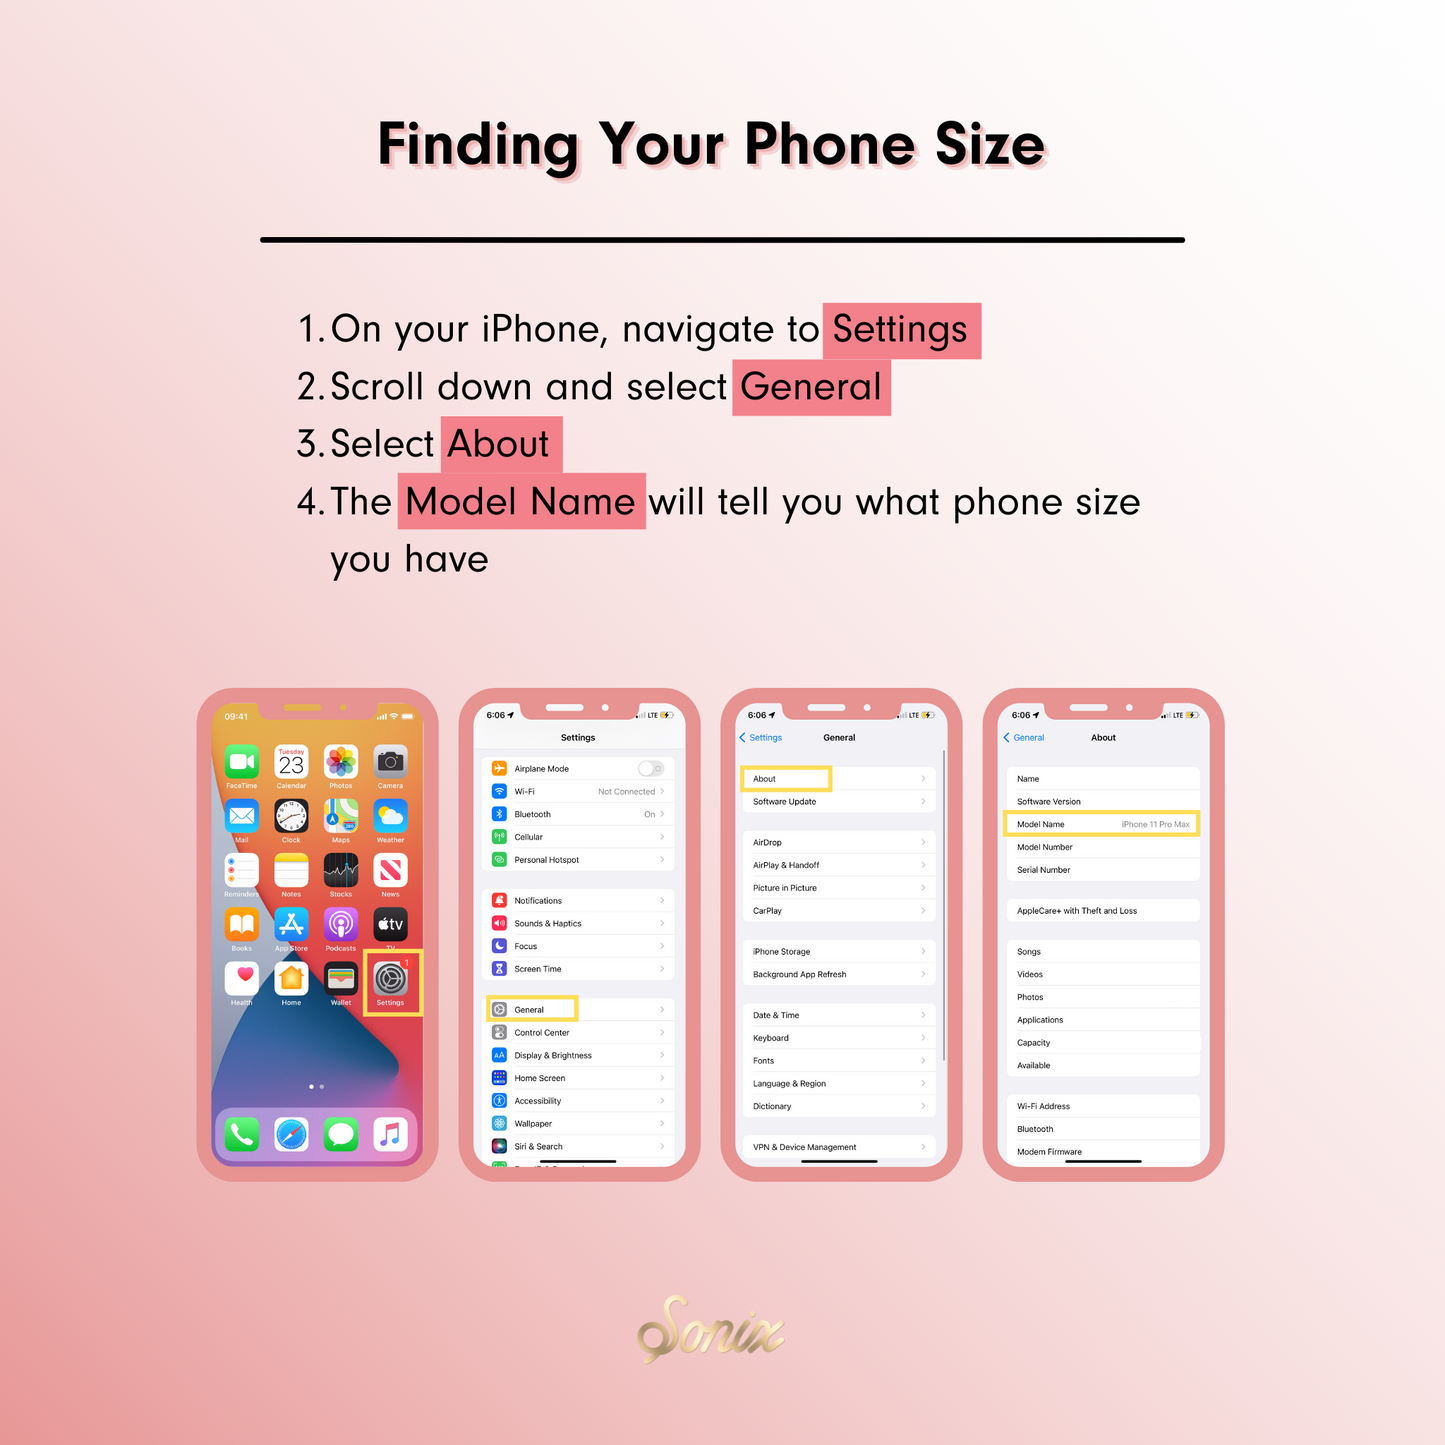 tips on how to find your correct phone size to order the right phone case